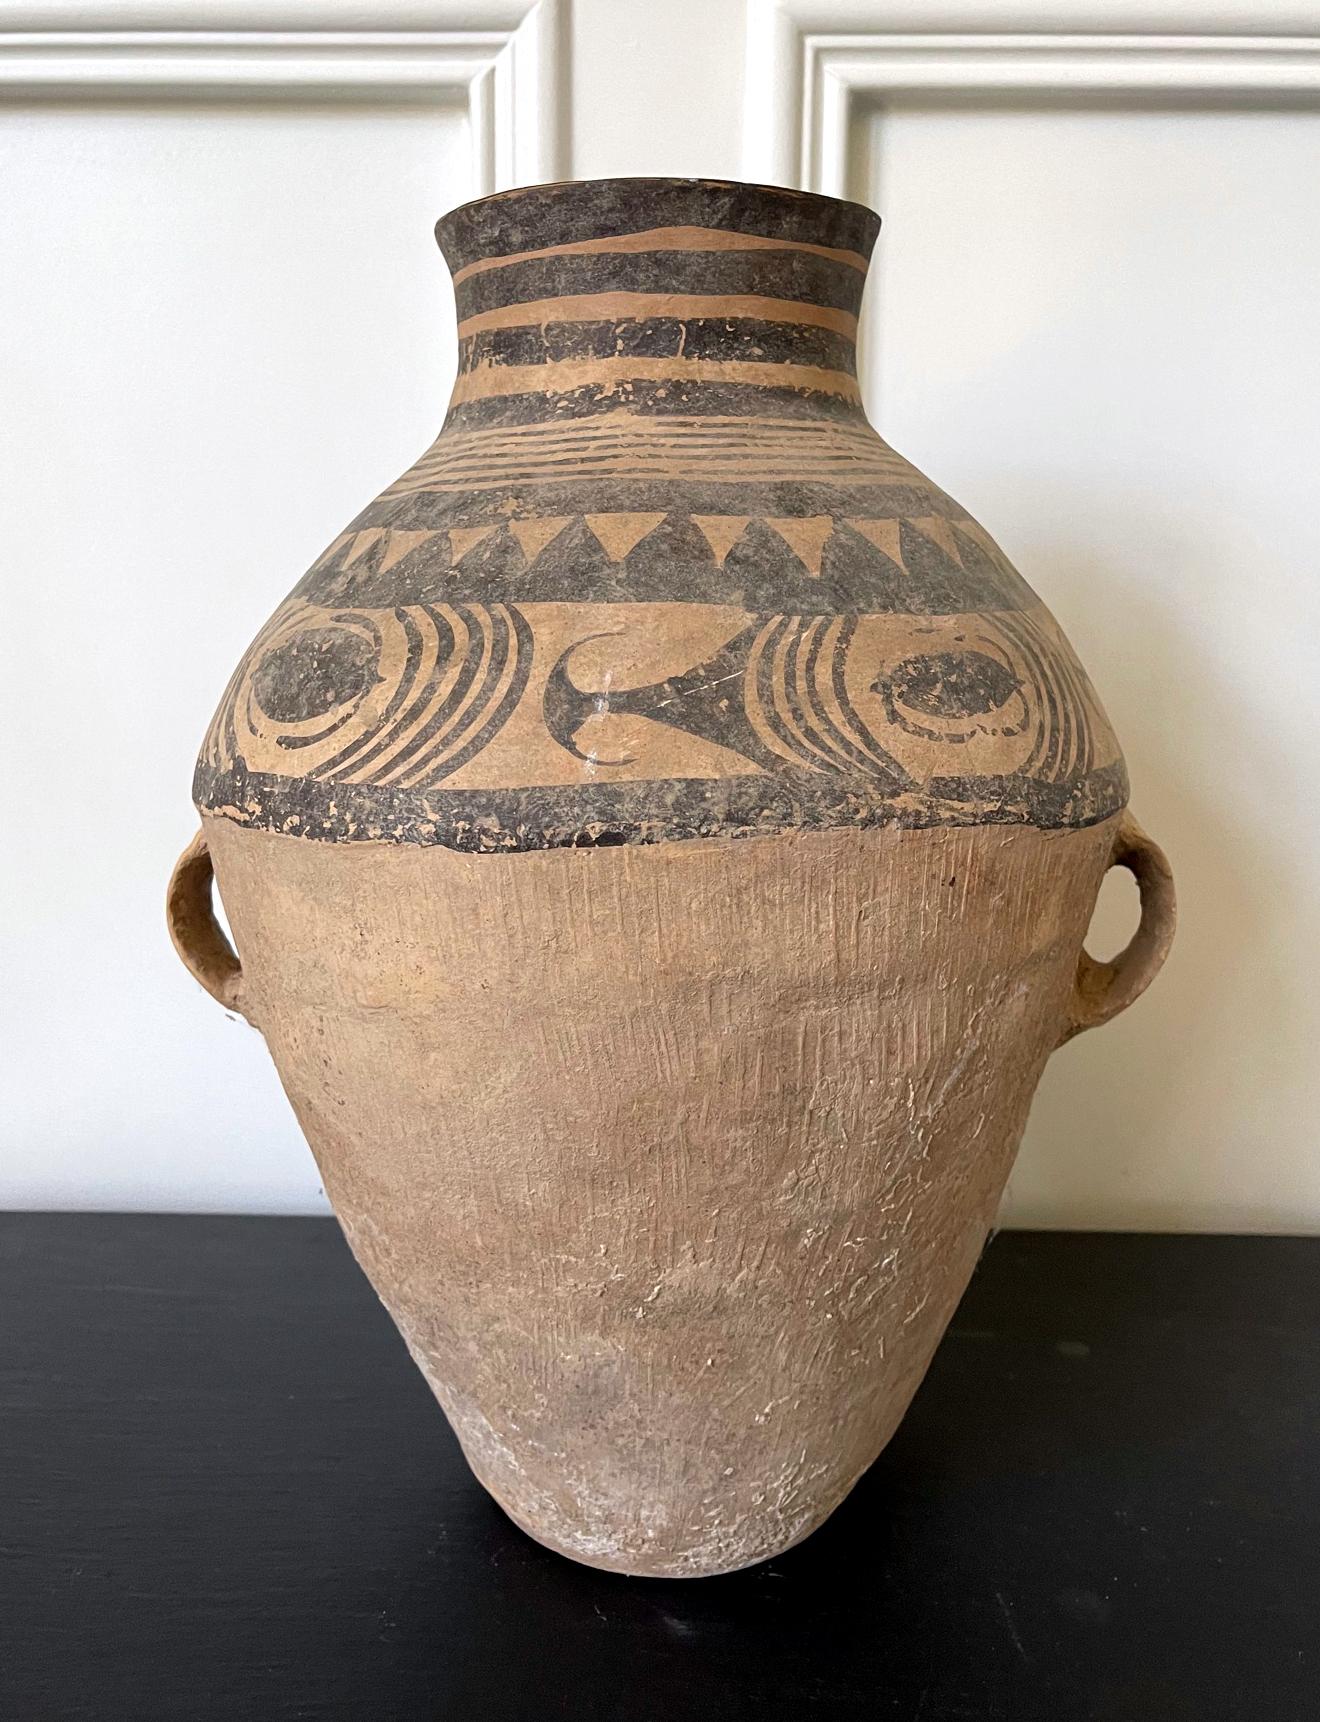 This large Chinese neolithic jar was likely from one of the cultural clusters along the Yellow River in Northern China such as Yangshao culture (5000-3000BC). The coarse earthen ware features a bulbous body, a short neck opening to a round mouth and